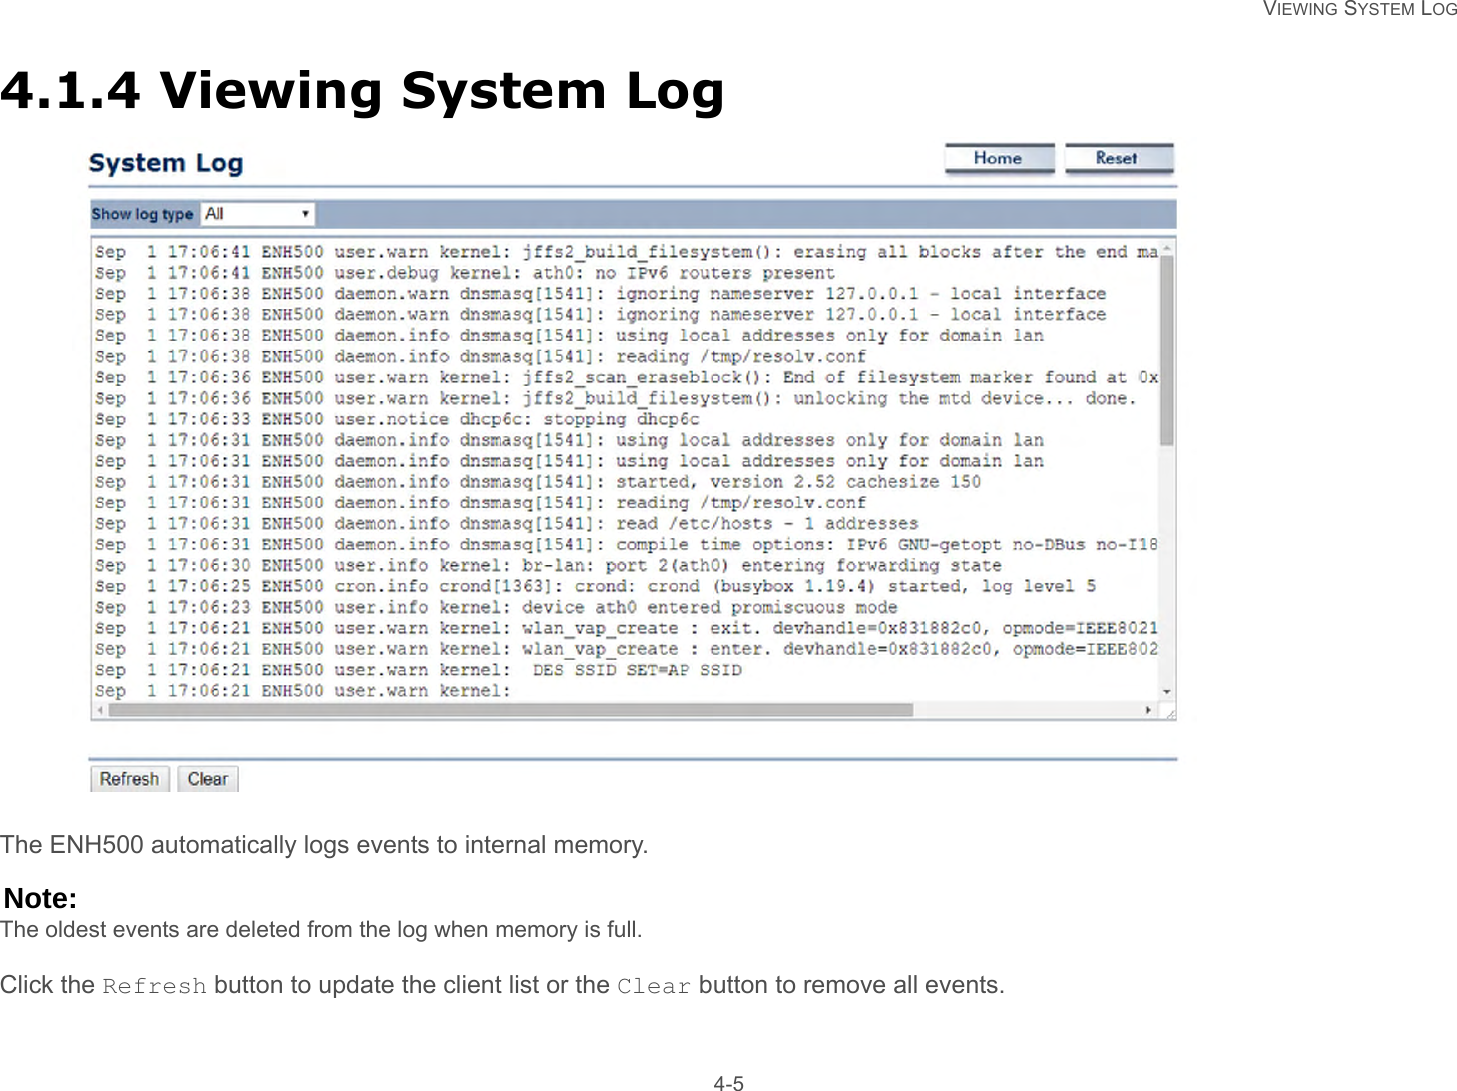   VIEWING SYSTEM LOG 4-54.1.4 Viewing System LogThe ENH500 automatically logs events to internal memory.Note:The oldest events are deleted from the log when memory is full.Click the Refresh button to update the client list or the Clear button to remove all events.